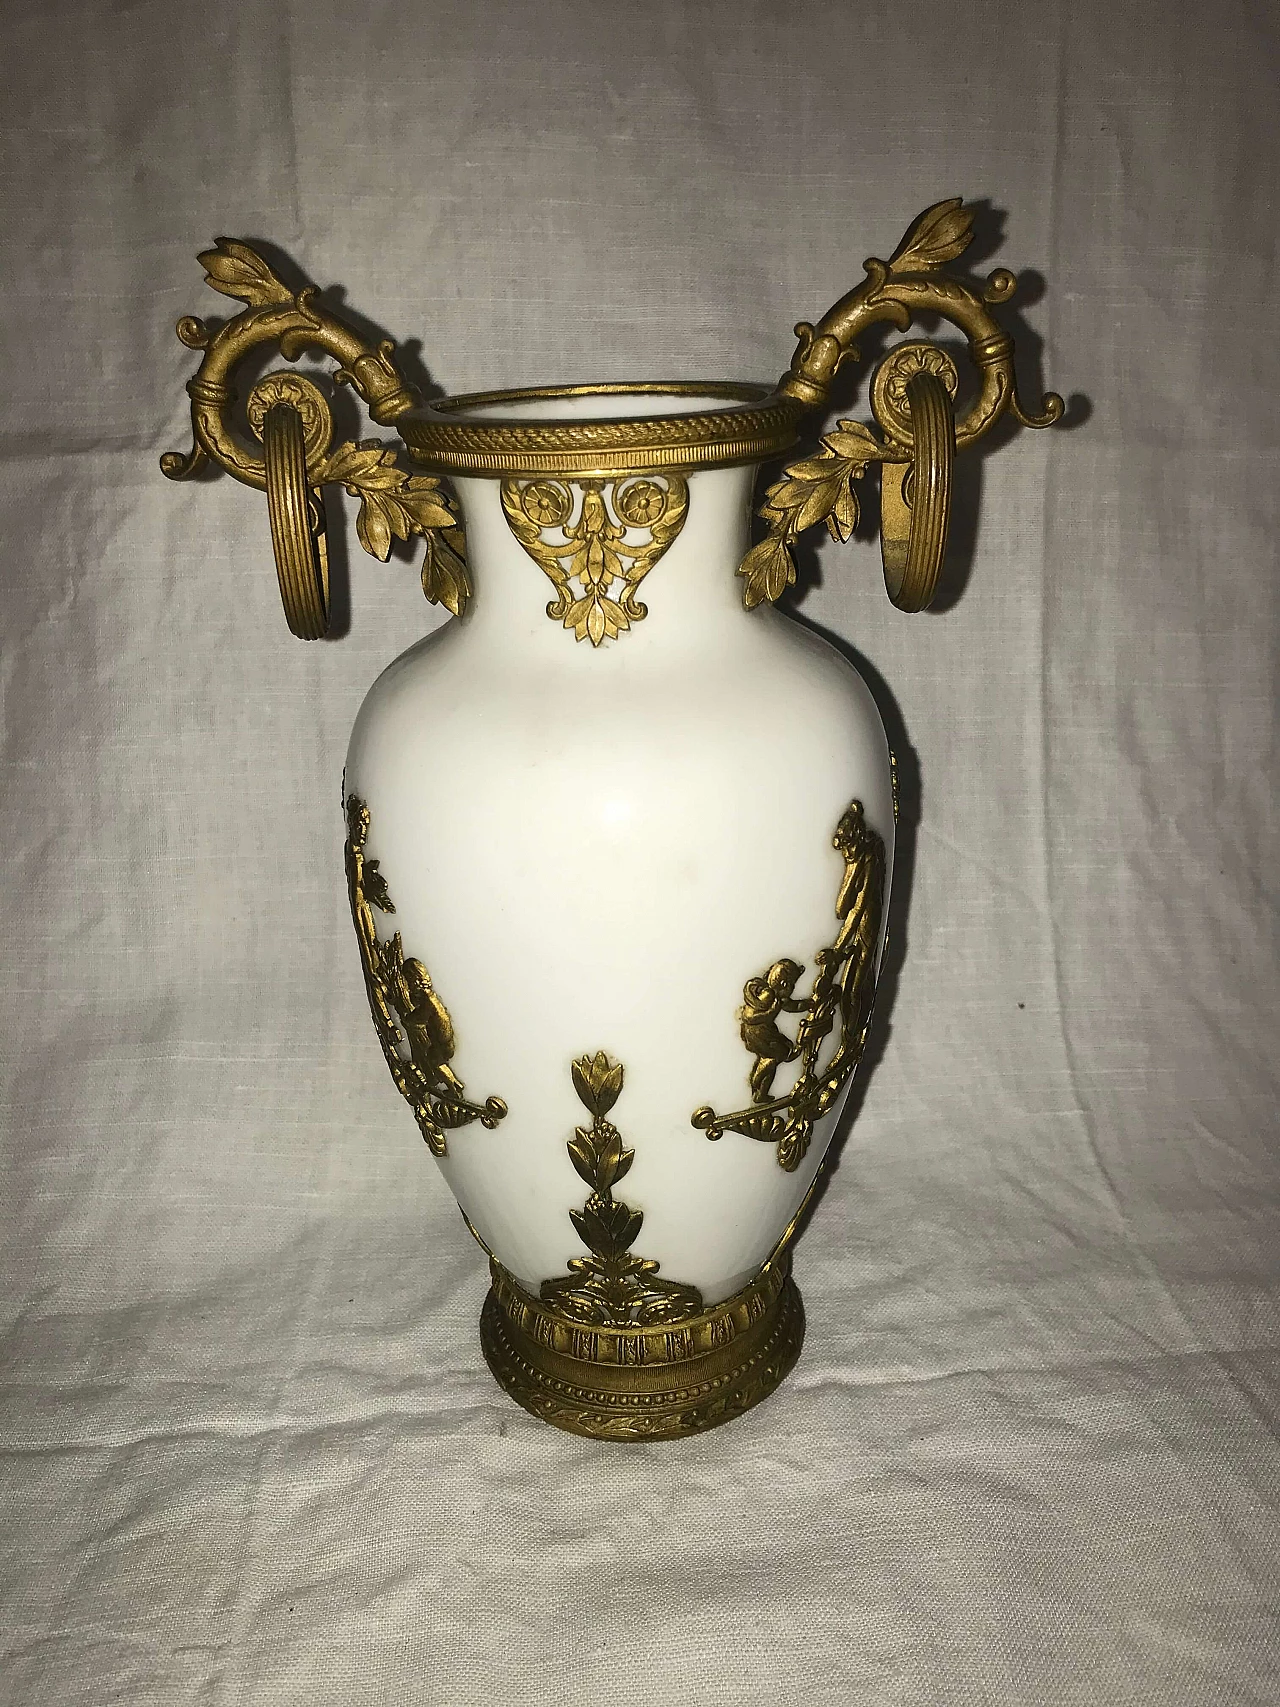 Neoclassical bronze and porcelain vase, 18th century 1276784